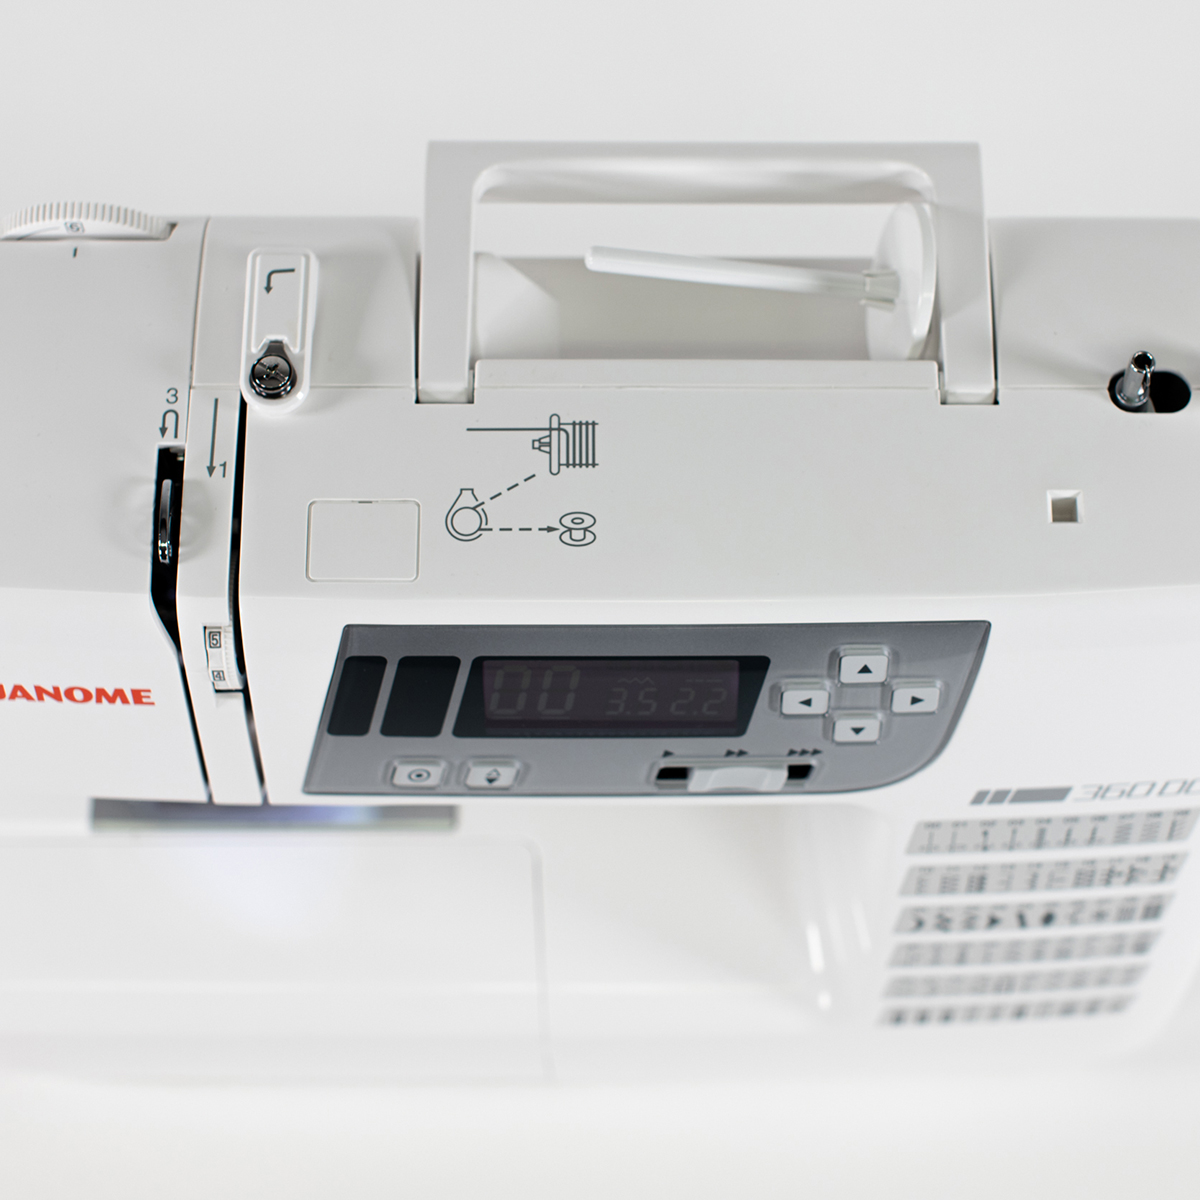 Janome 360DC top view showing handle